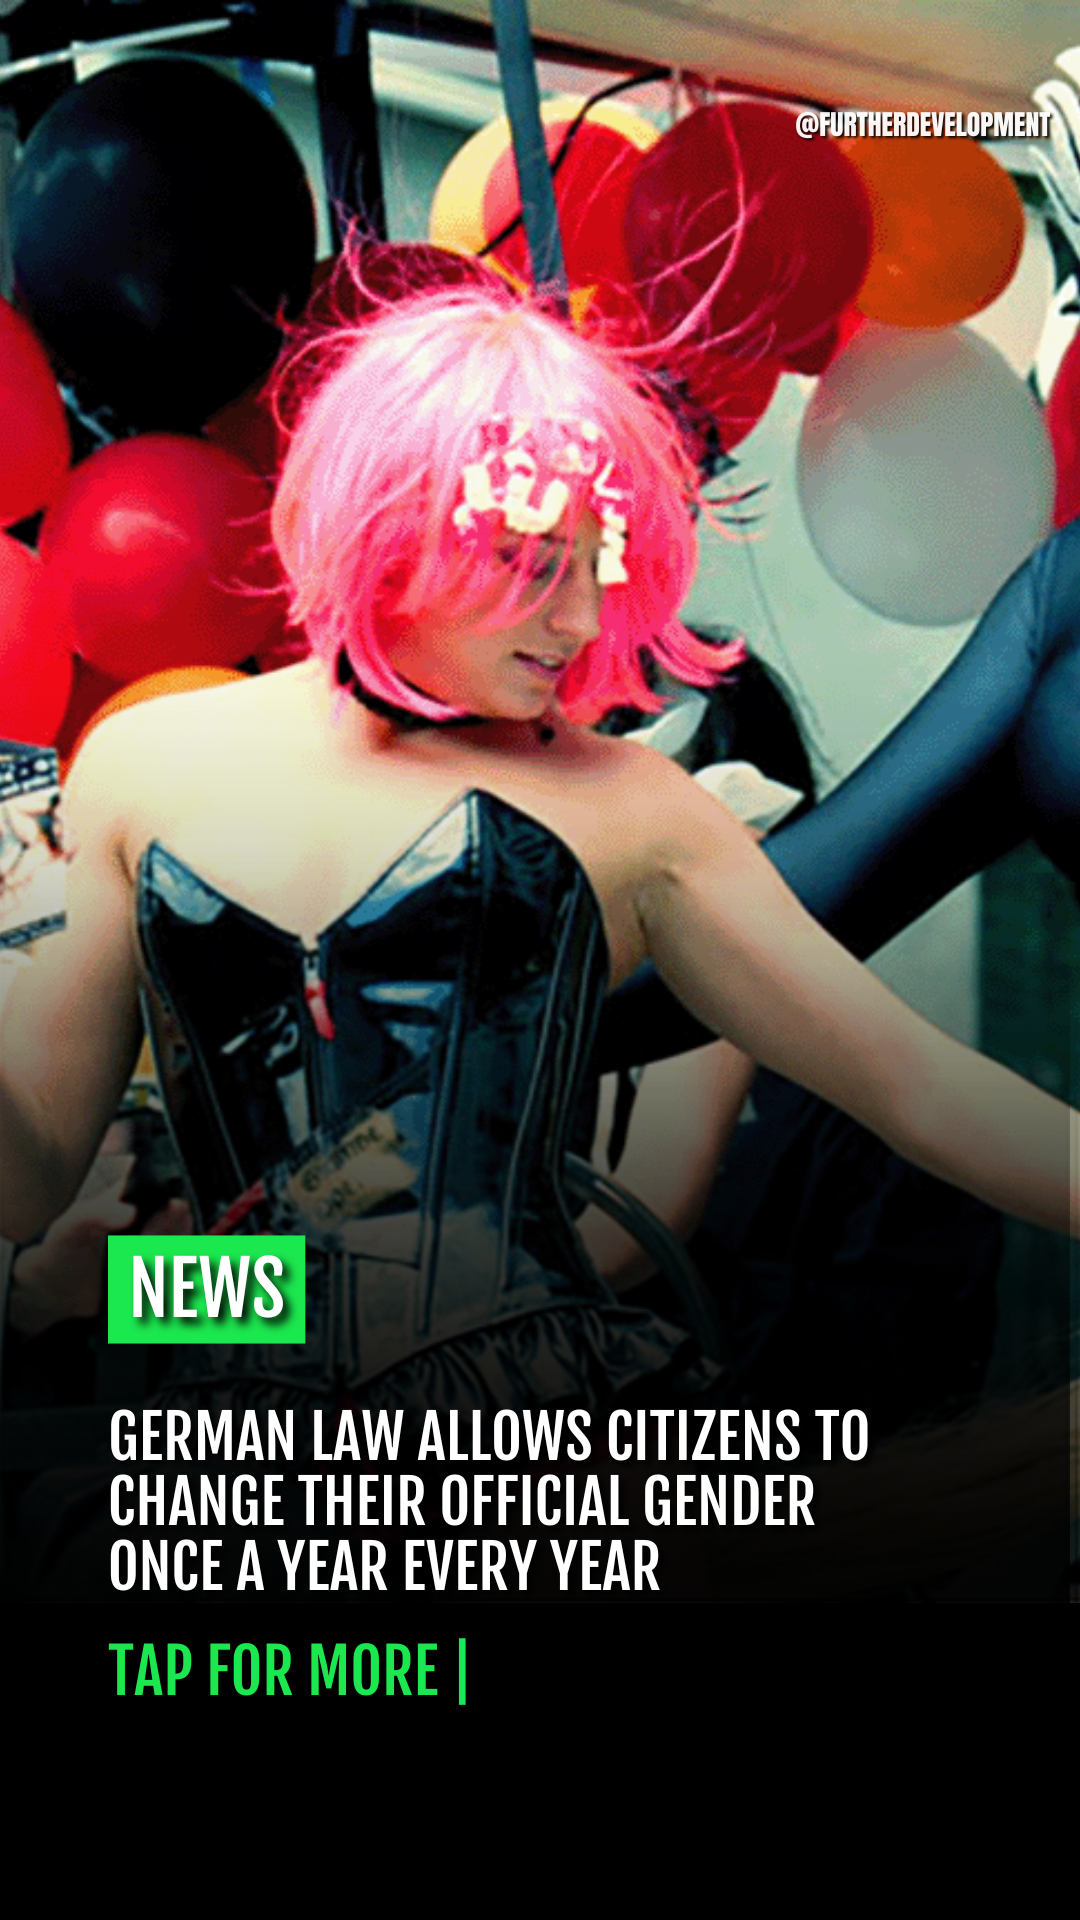 German law allows citizens to change their official gender once a year Every year